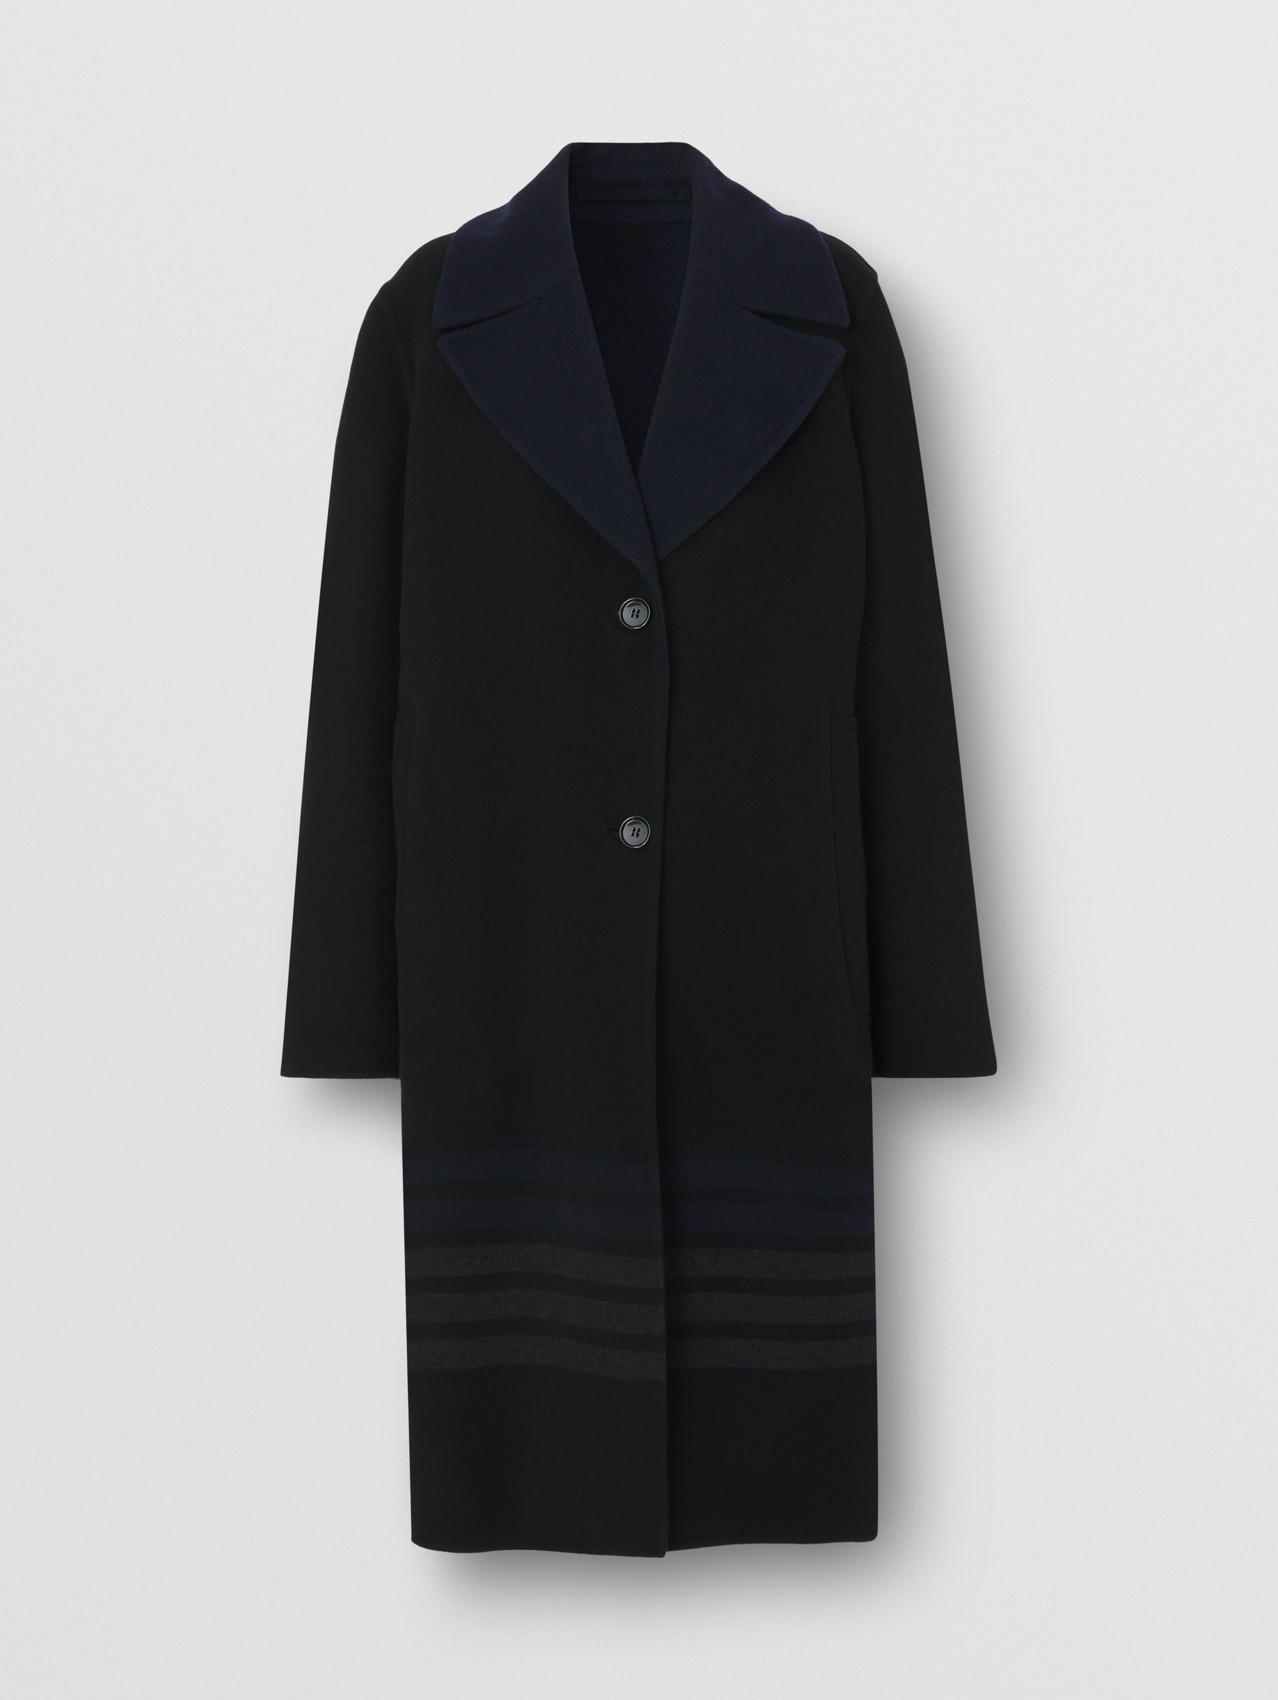 Striped Wool Cashmere Tailored Coat in Navy Black